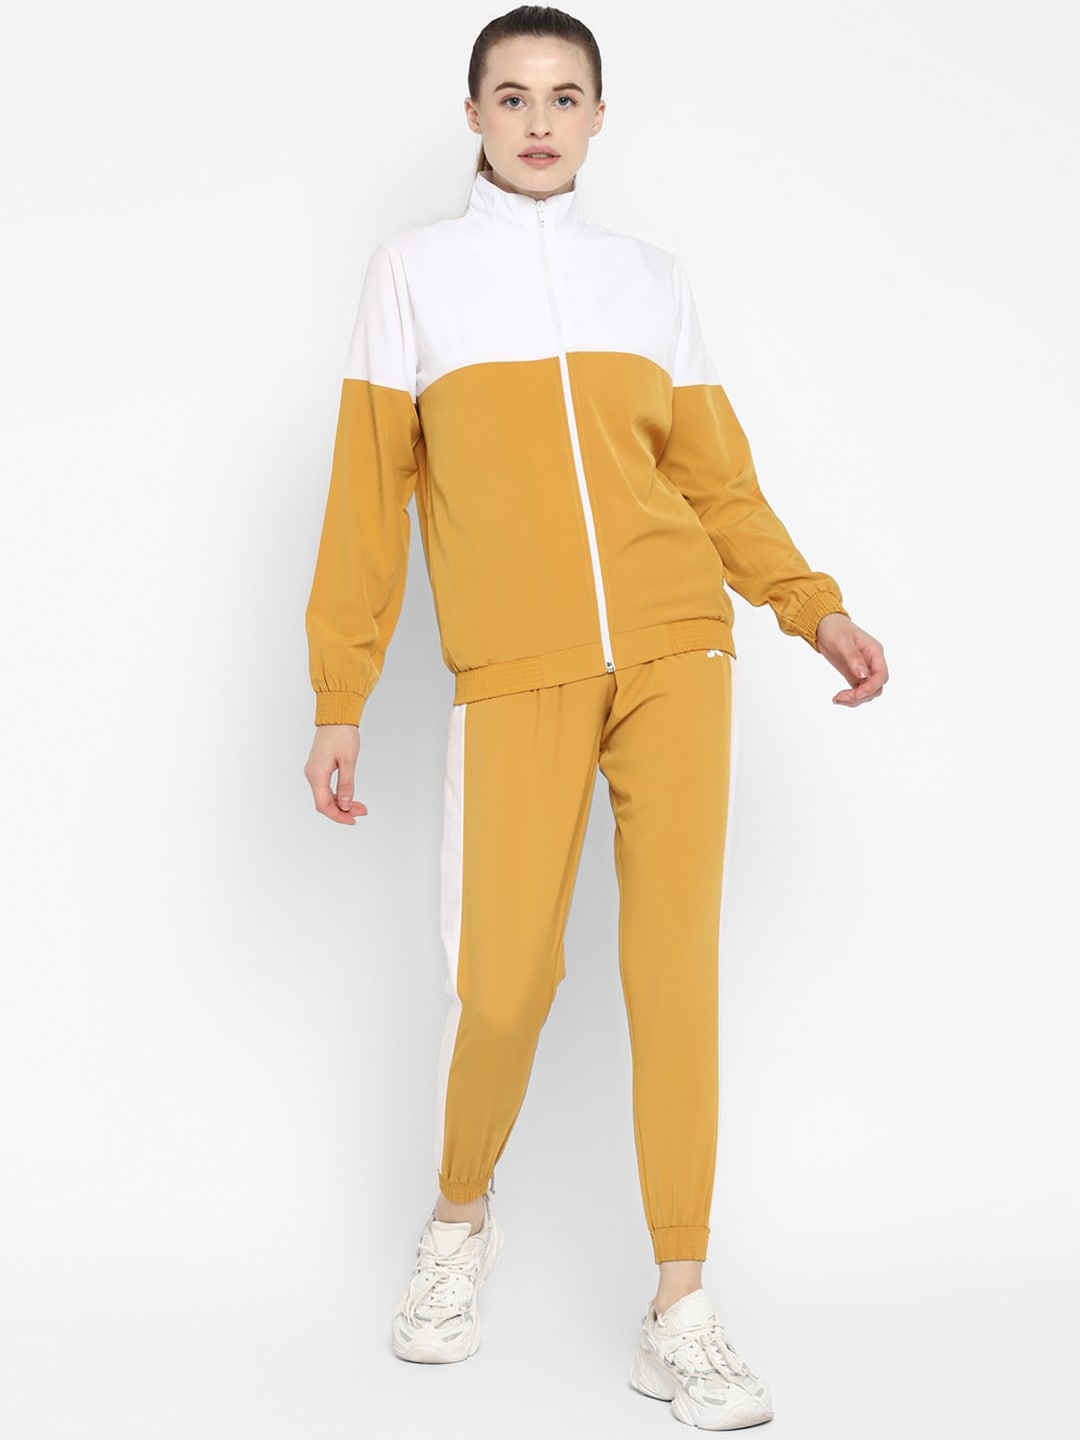 OFF LIMITS Women Mustard & White Colourblocked Tracksuits Price in India